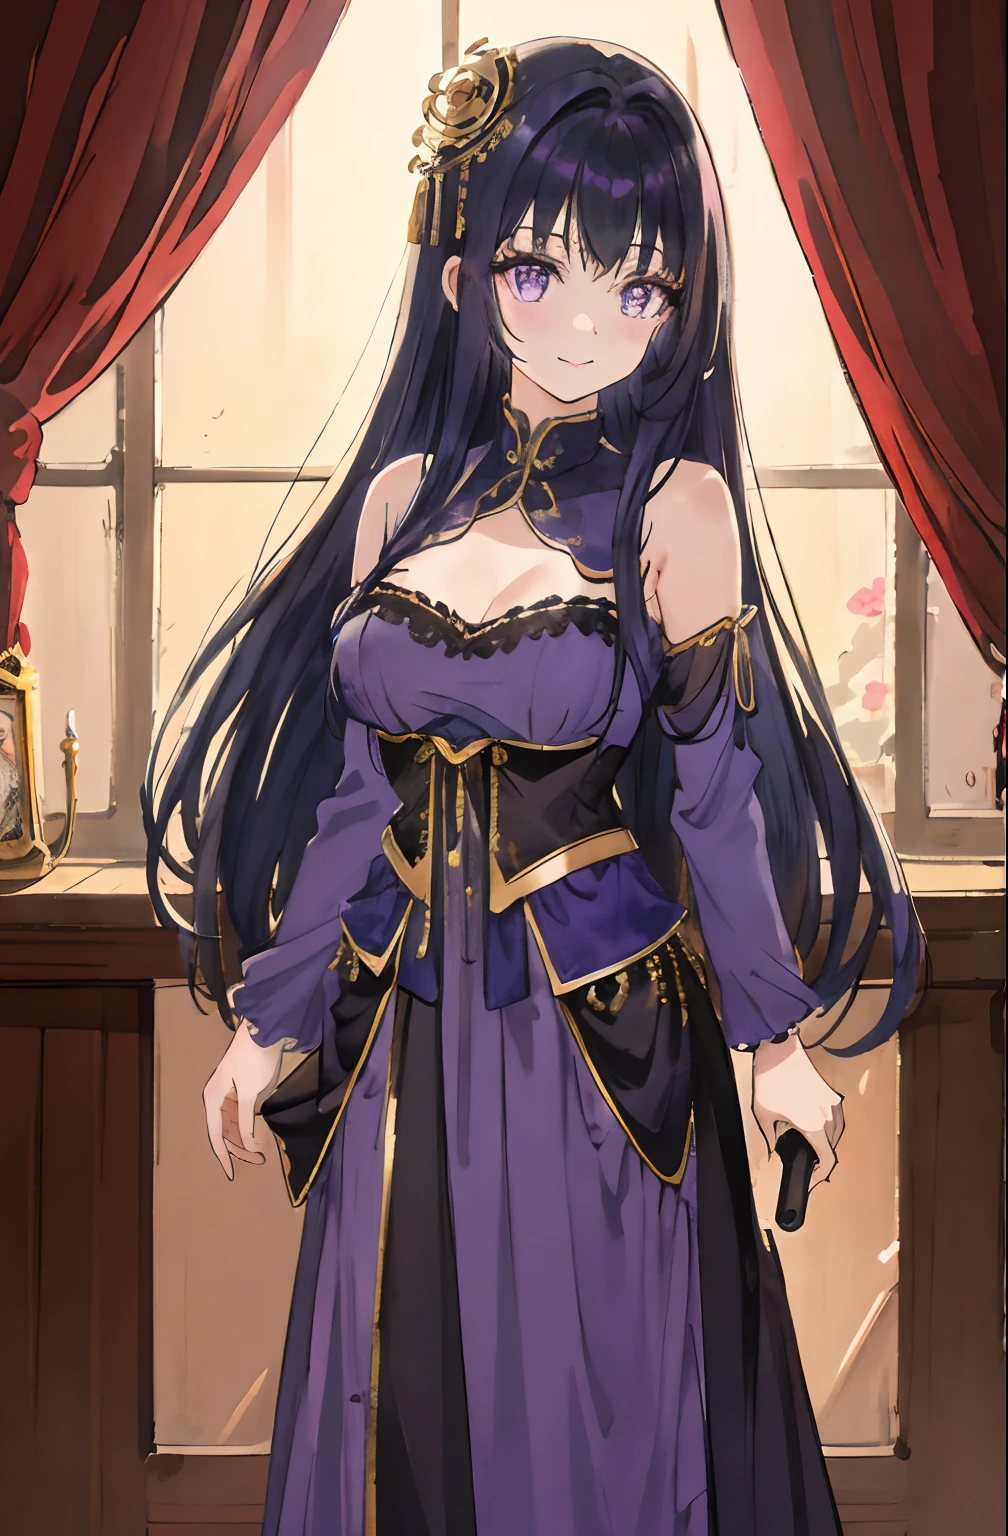 A beautiful and cute girl, huge smile、Idle Pose、1girl in, Solo, Long hair, A dark-haired,Purple eyes, hair messy, long hair bangs, Beautiful detailed eyes, Looking at Viewer, deadpan, Closed mouth, Portrait, Bangs,Blue Idol Costume,corsets,Blue hair ornament,Upper body ,full body Esbian, Small breasts, Backlight, stage